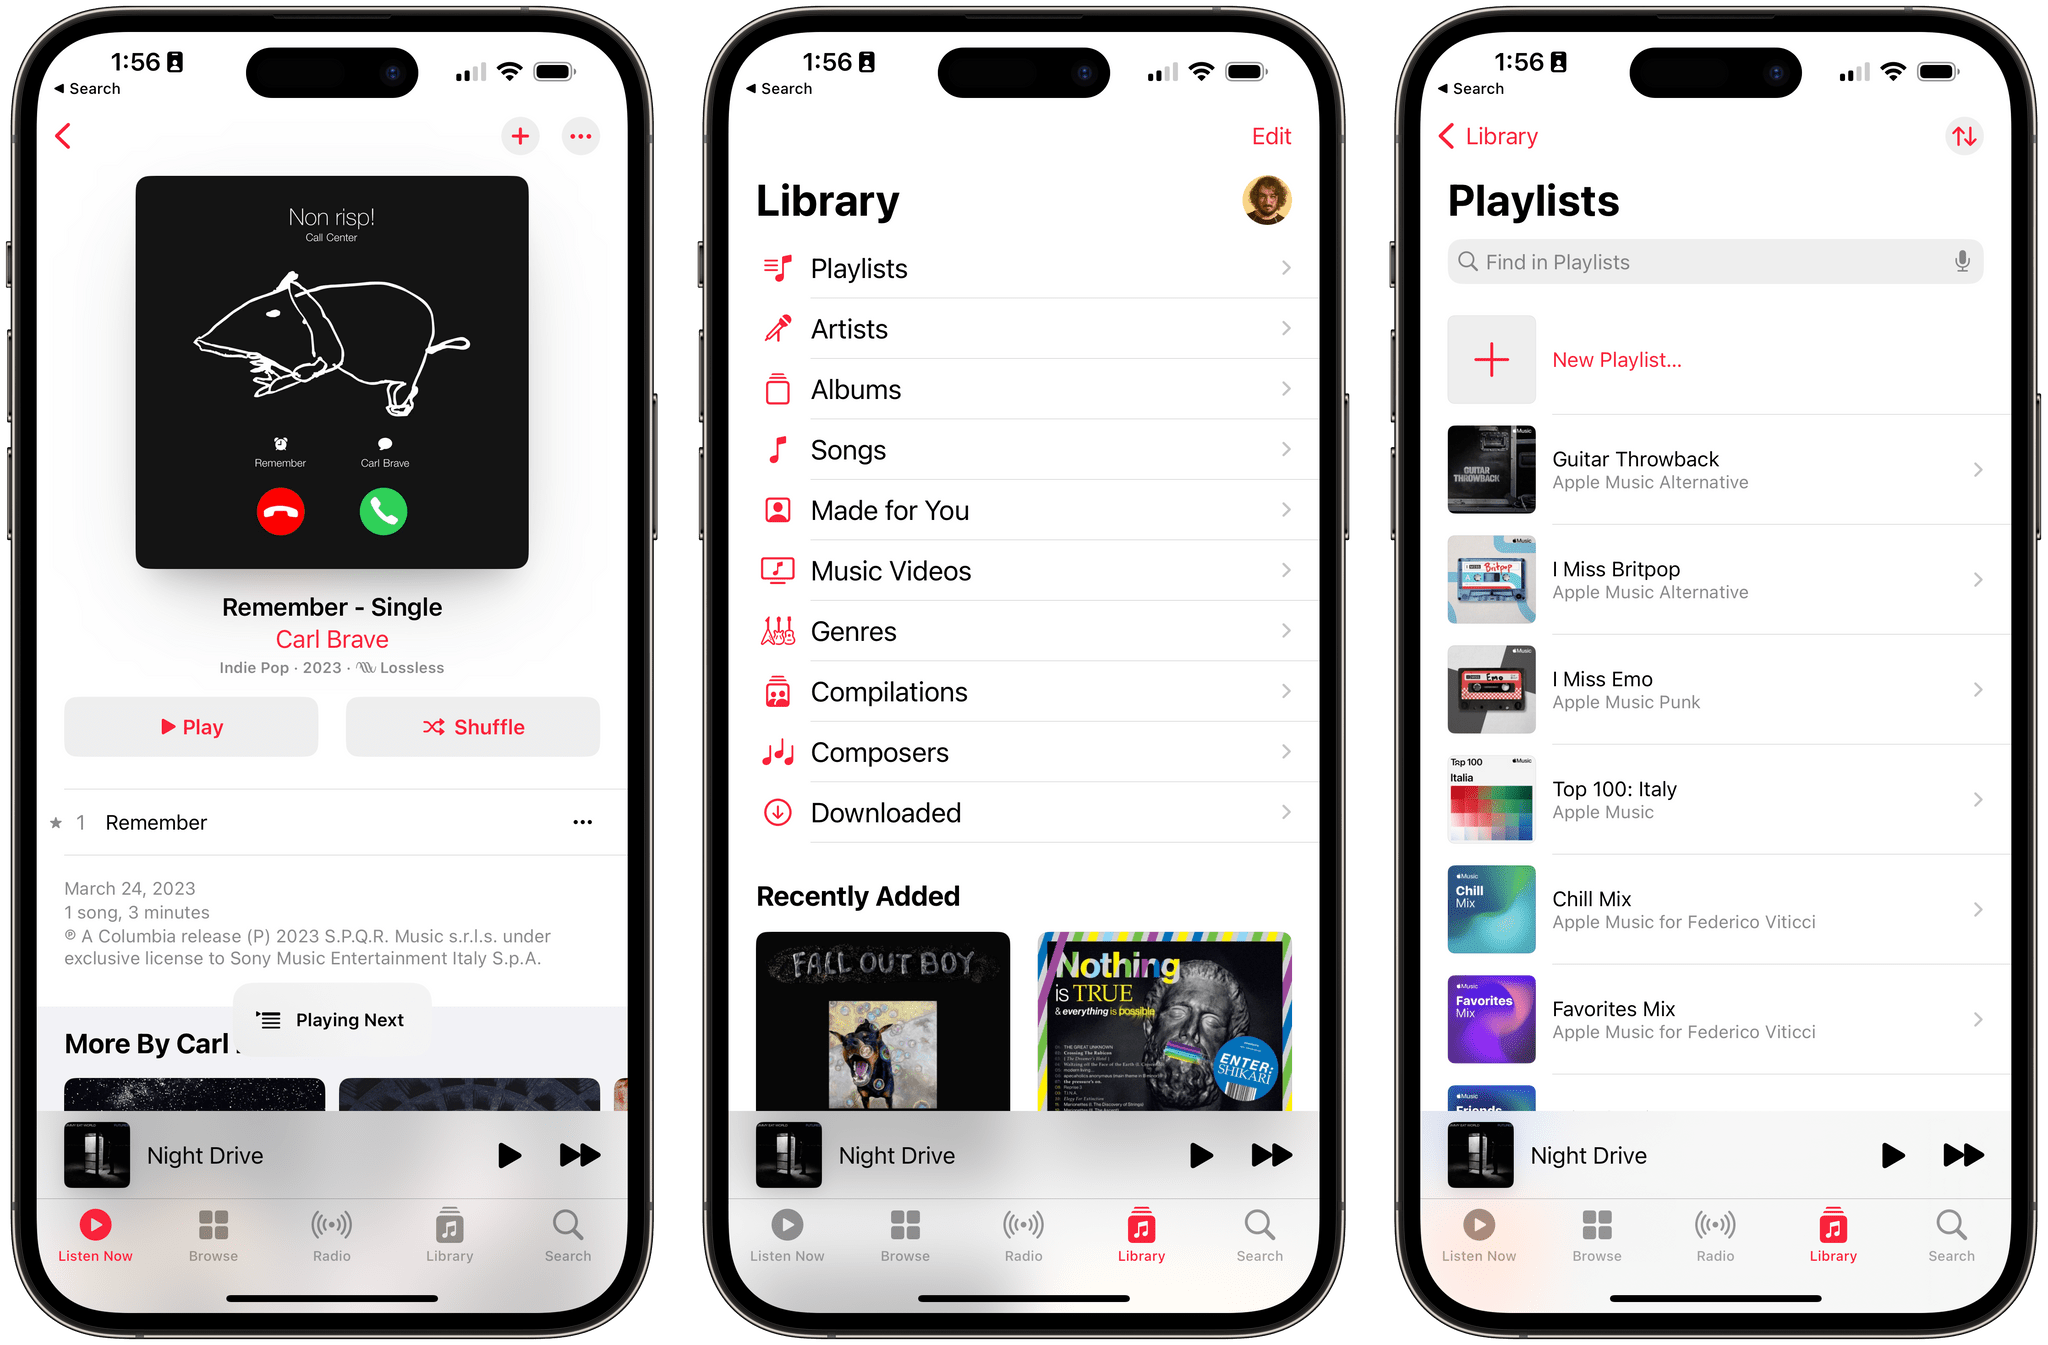 The new in-app alerts for Music (left).